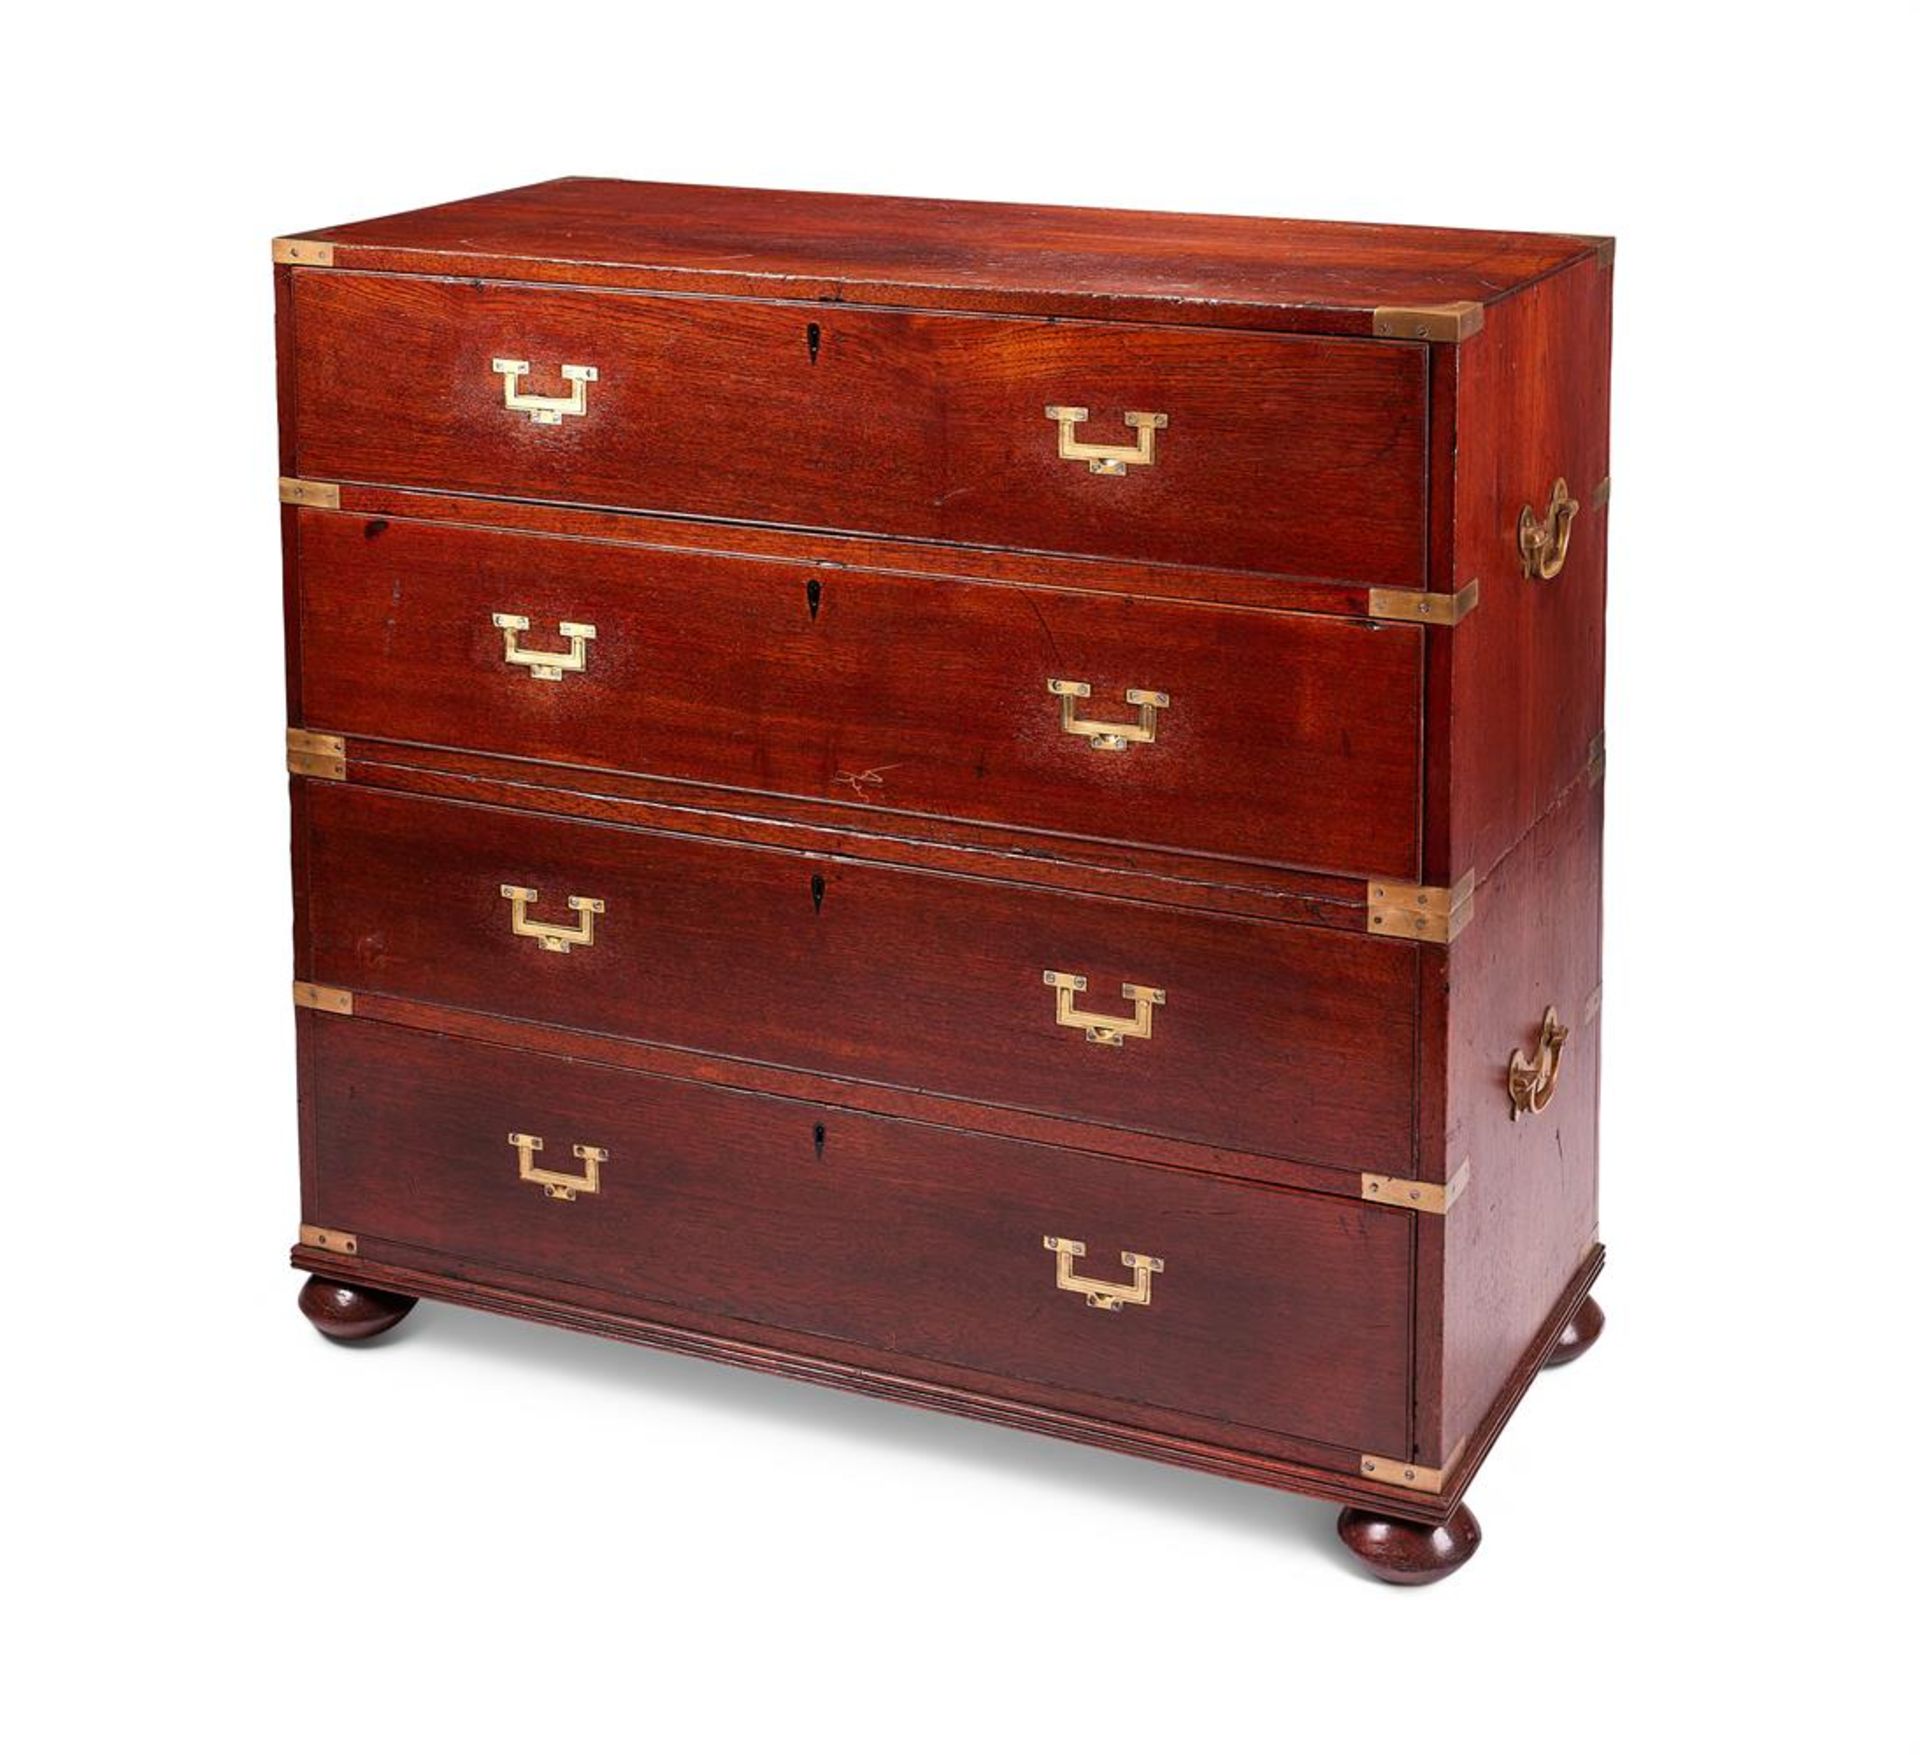 AN EARLY VICTORIAN TEAK AND BRASS MOUNTED CAMPAIGN CHEST OF DRAWERS, MID 19TH CENTURY